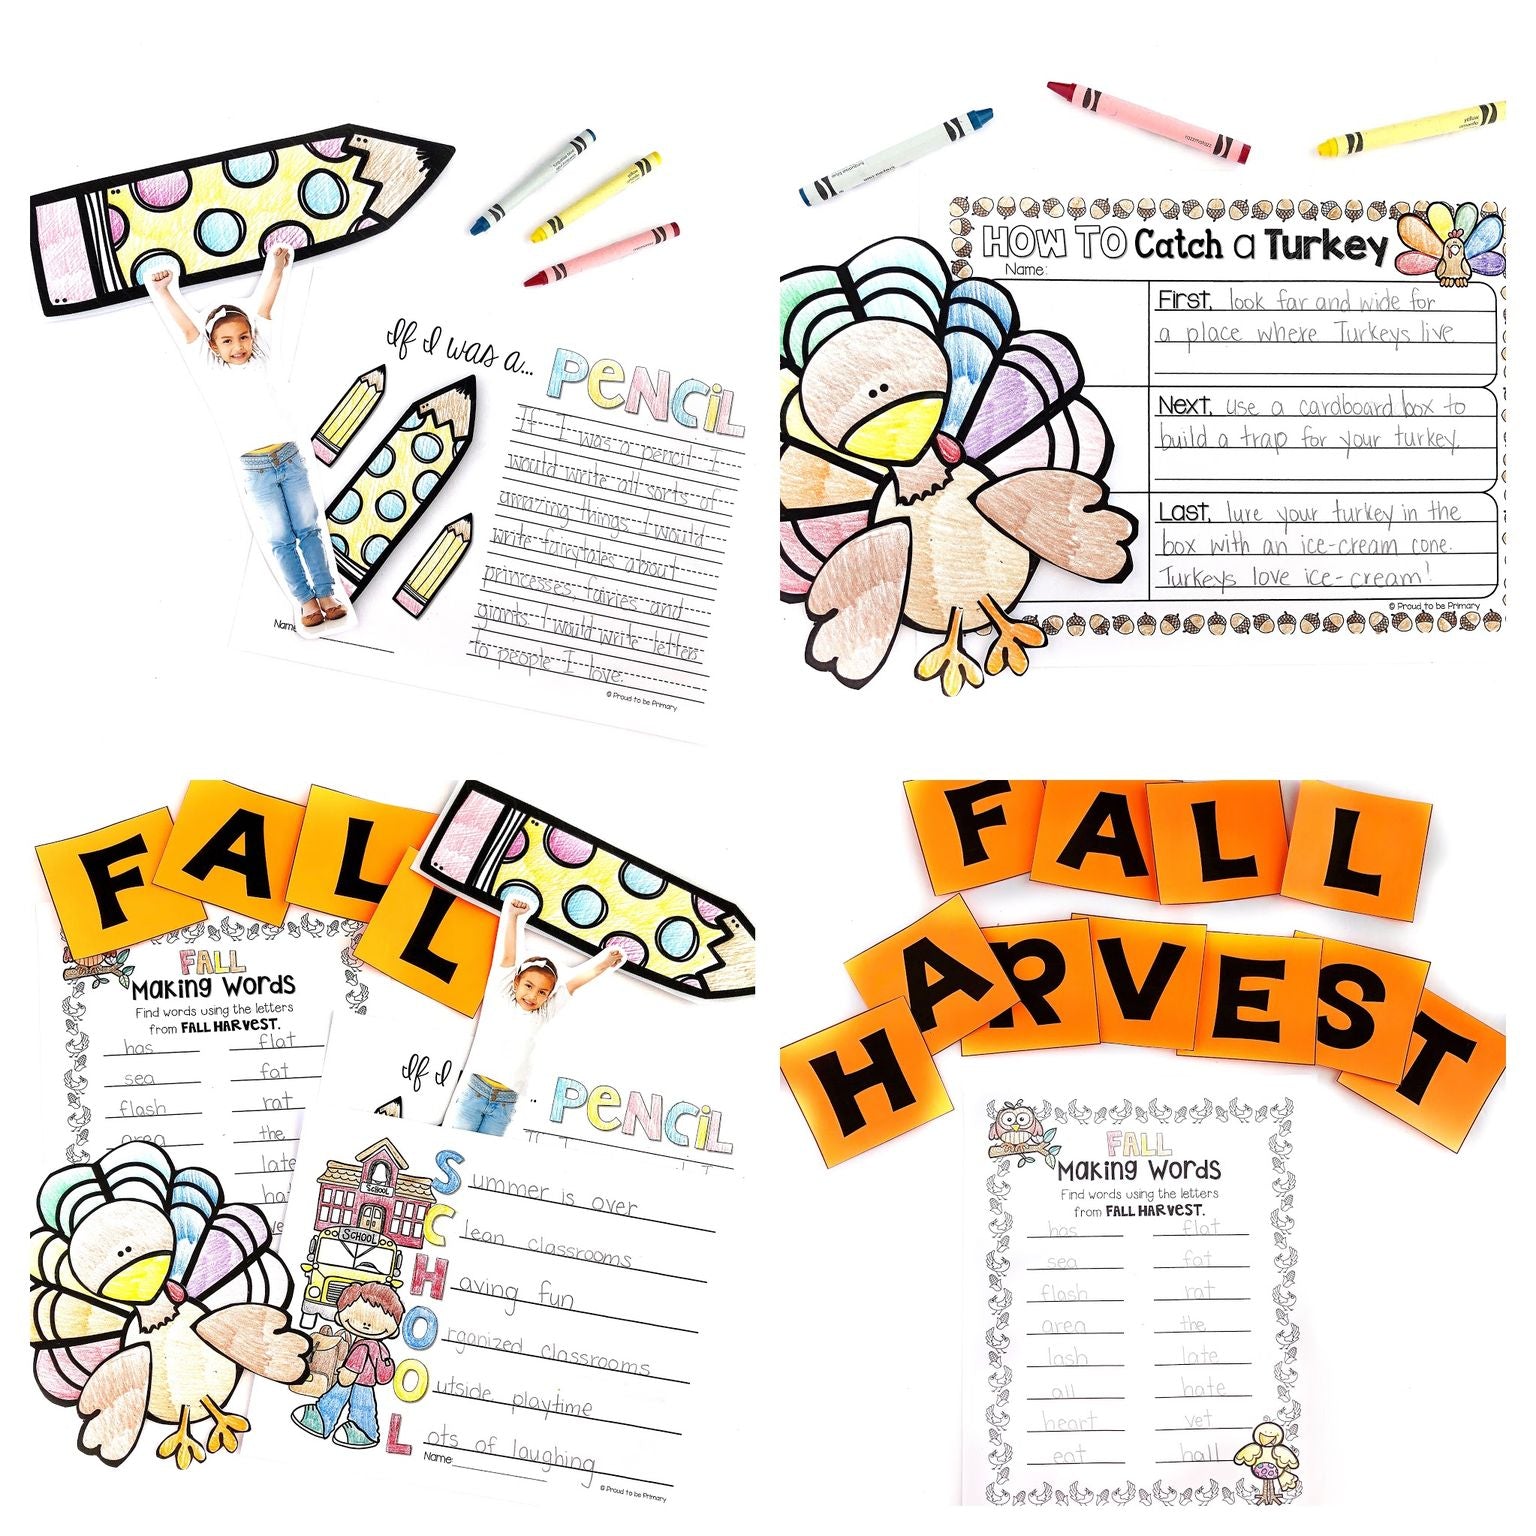 Writing and Word Work Activities Bundle - Proud to be Primary